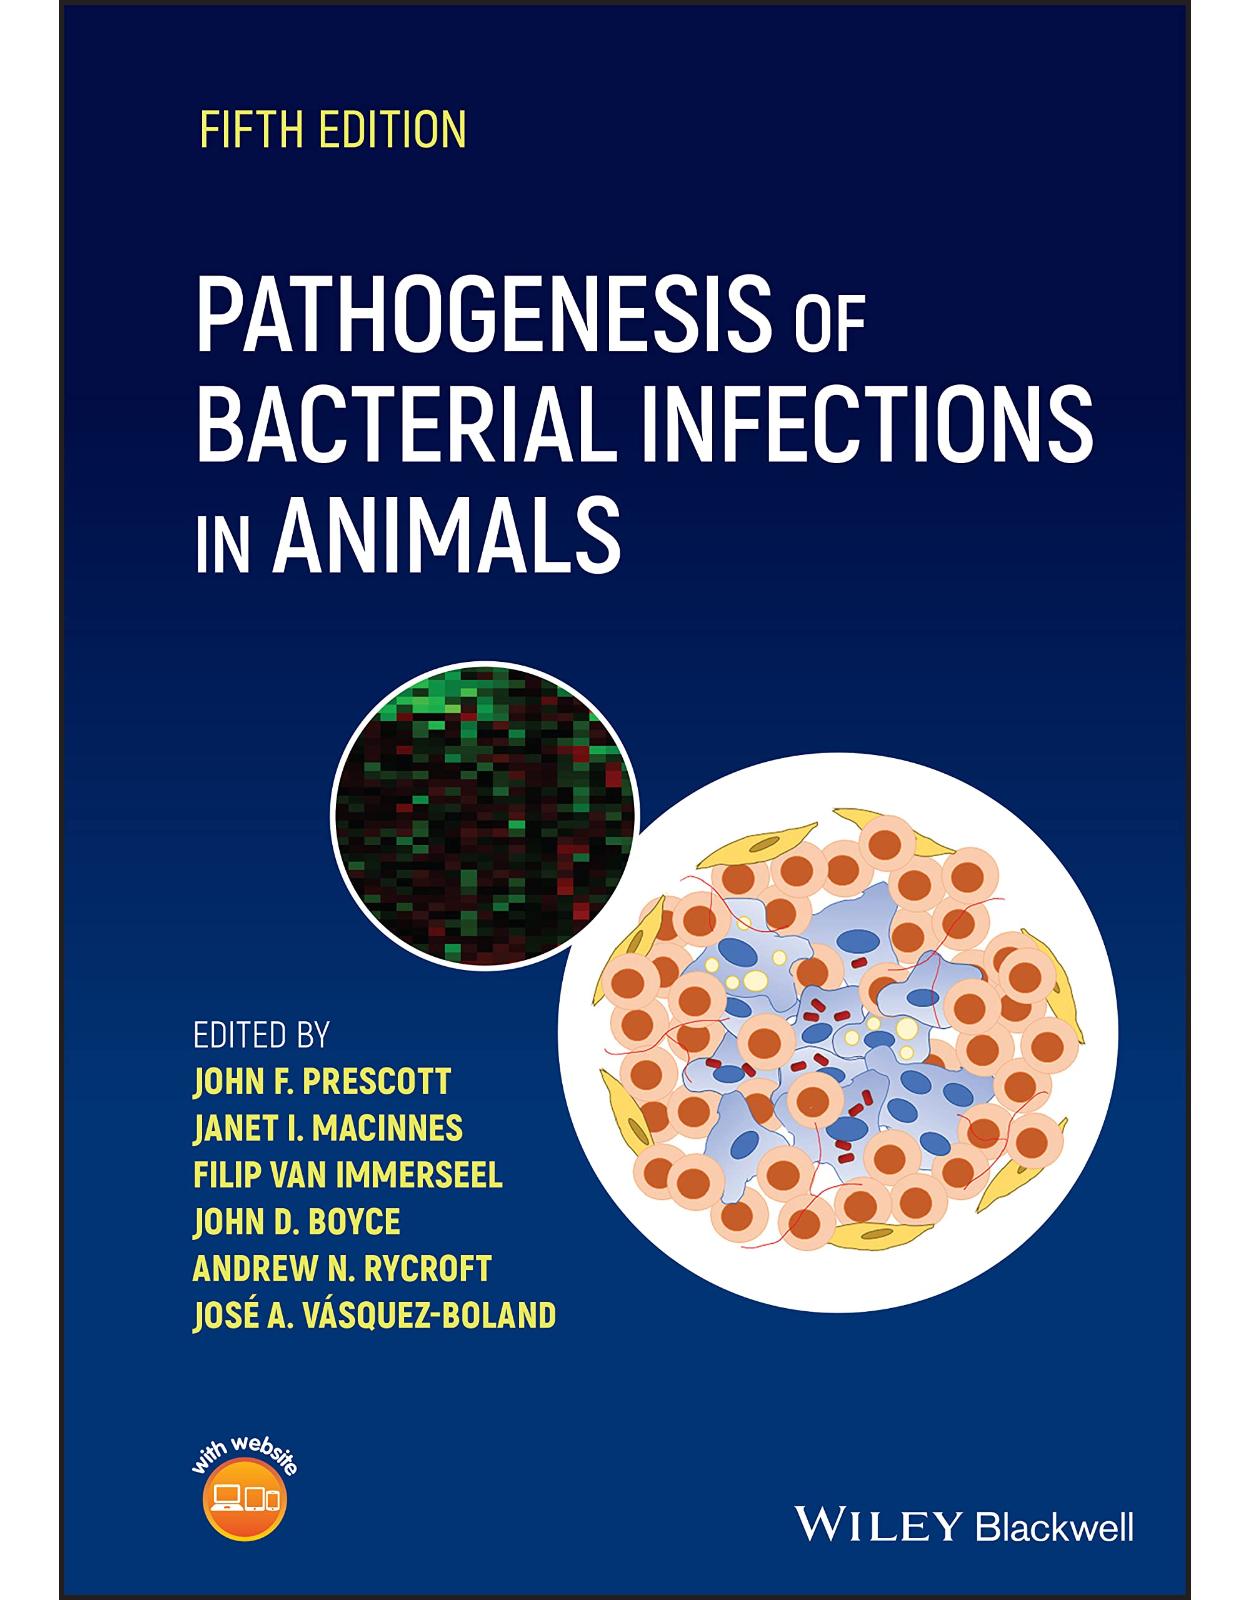 Pathogenesis of Bacterial Infections in Animals, 5th Edition